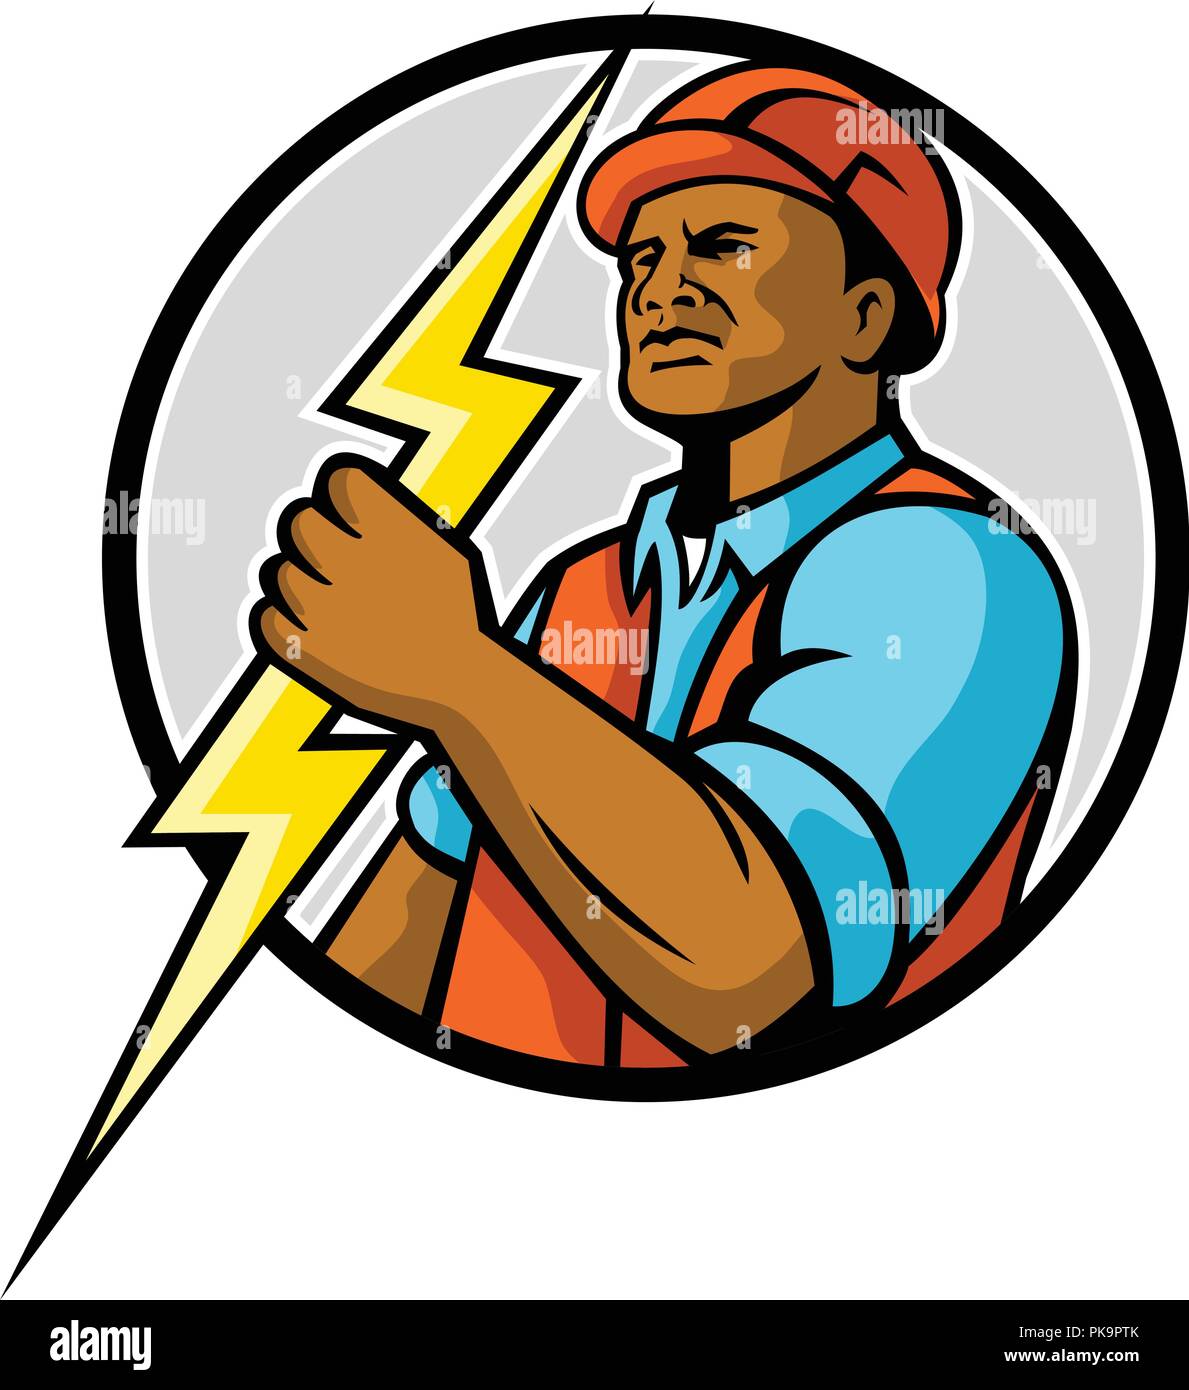 Mascot illustration of a black African American electrician or power lineman holding a lightning bolt set inside circle on isolated white background Stock Vector